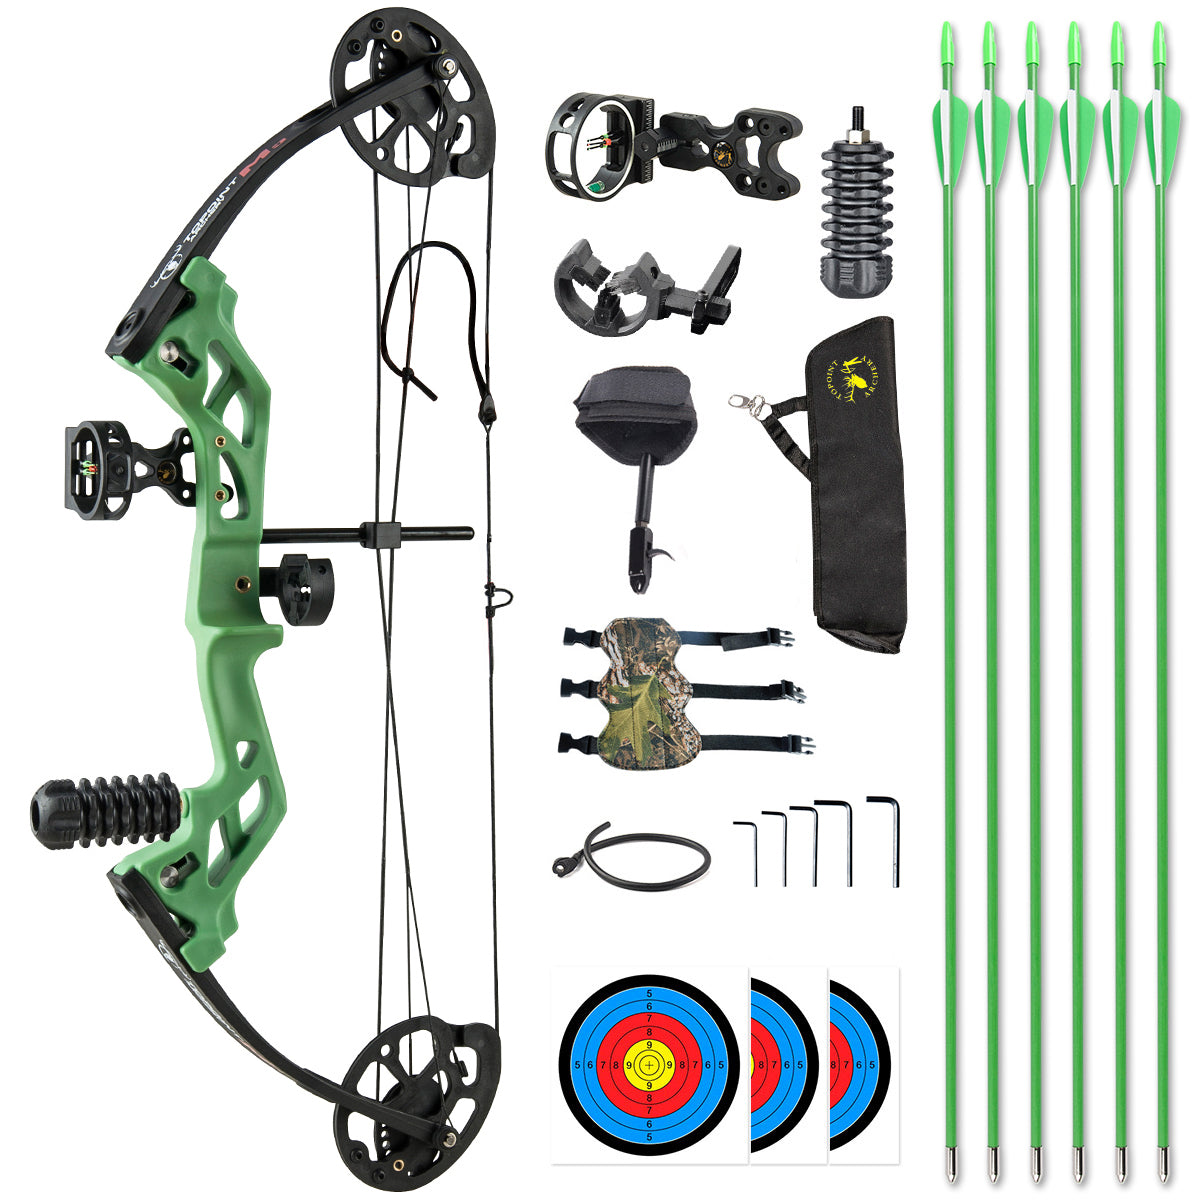 Topoint M3 Youth Compound bow Package